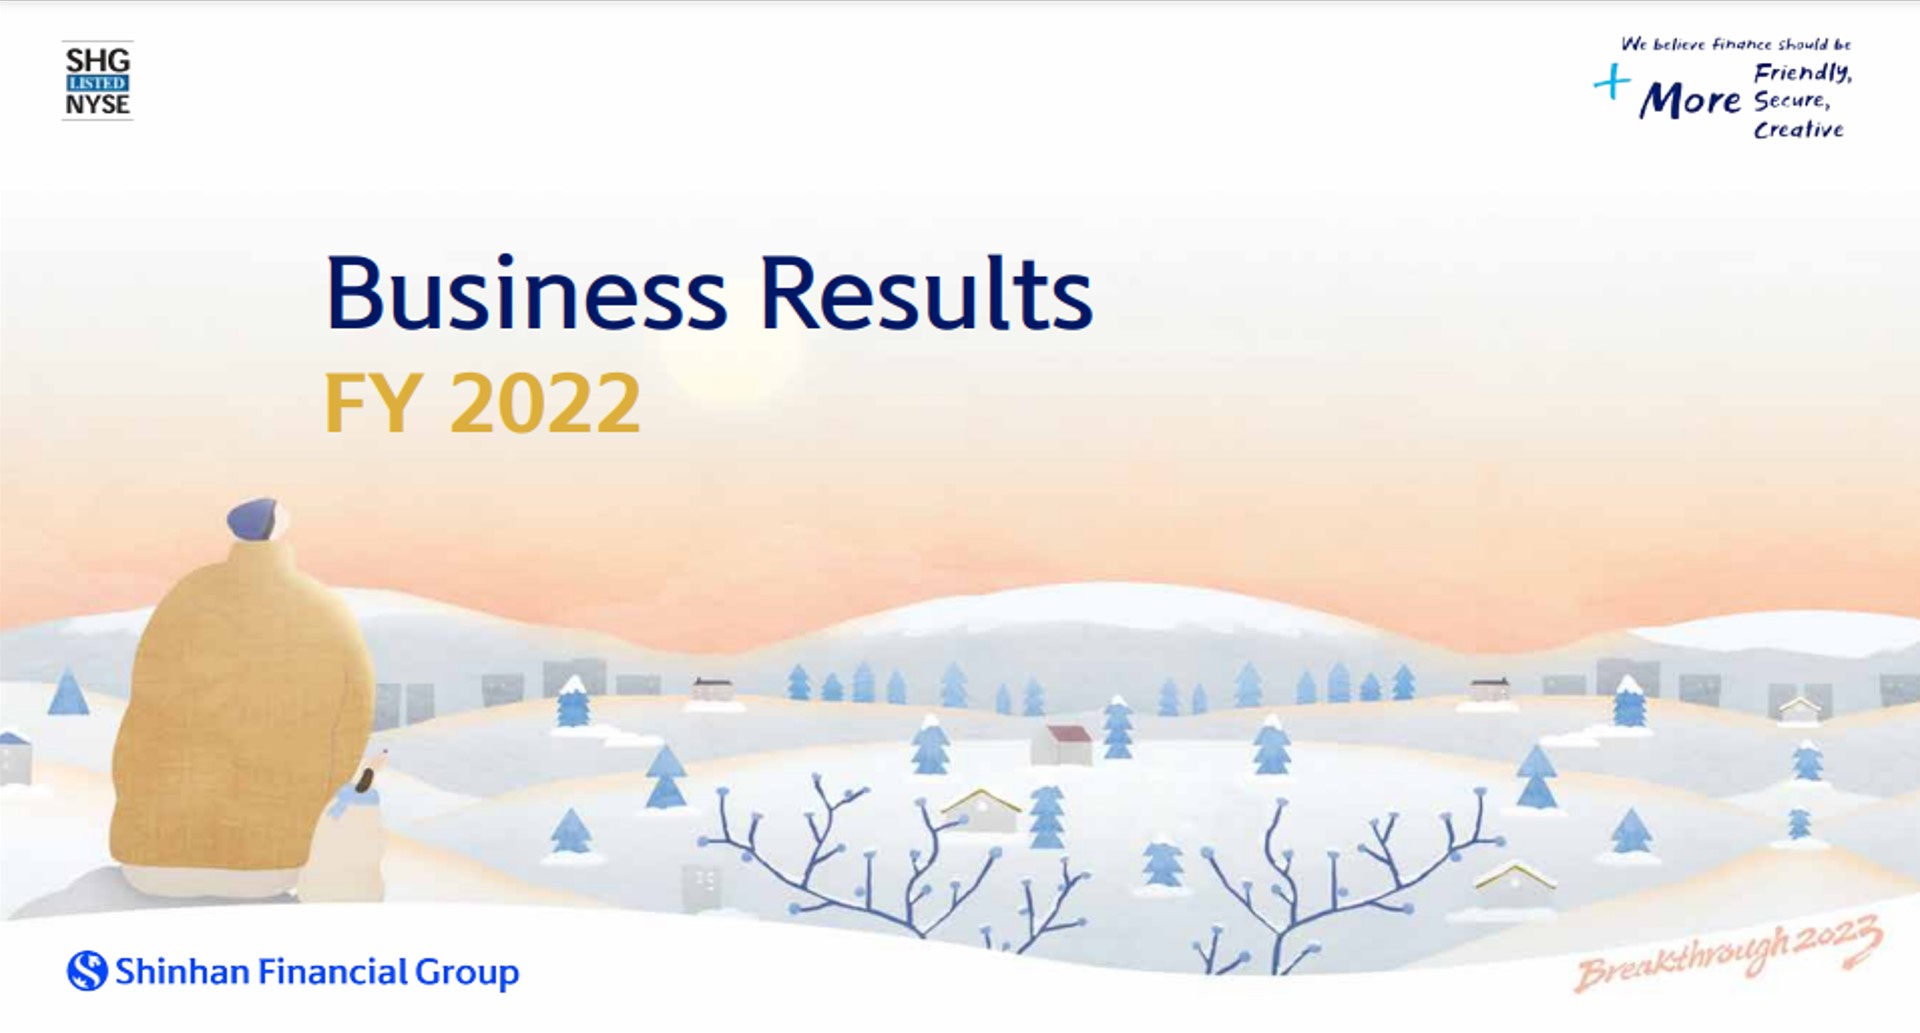 SFG's Business Results for FY2022